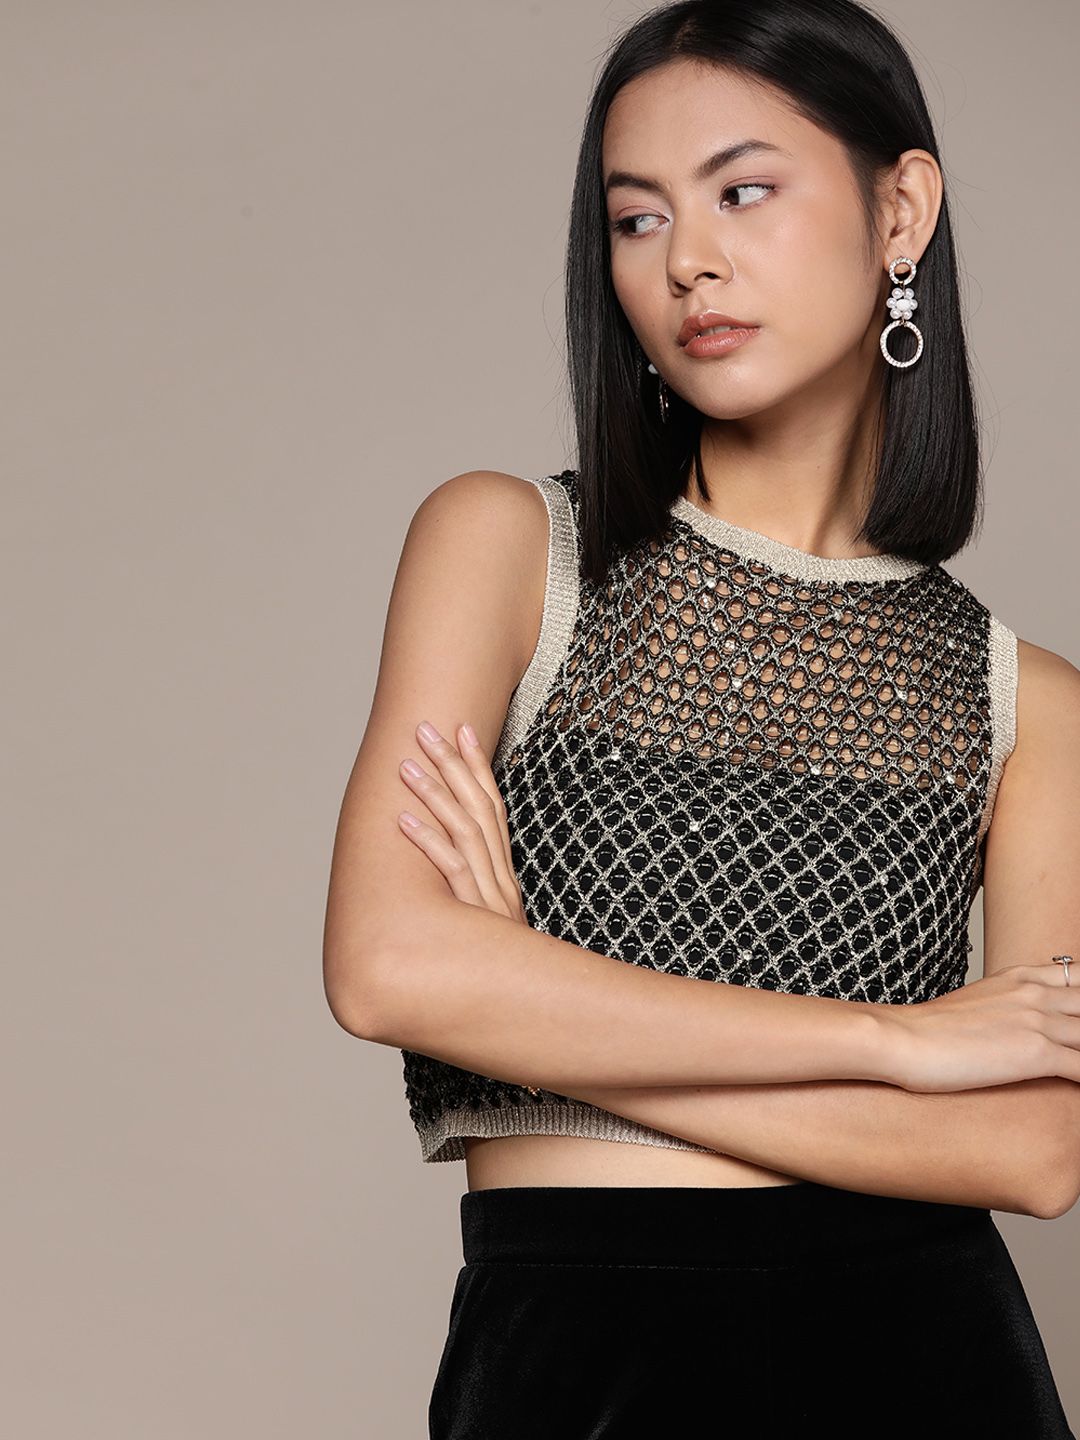 MANGO Open Knit Stone Studded Sheer Crop Top Price in India